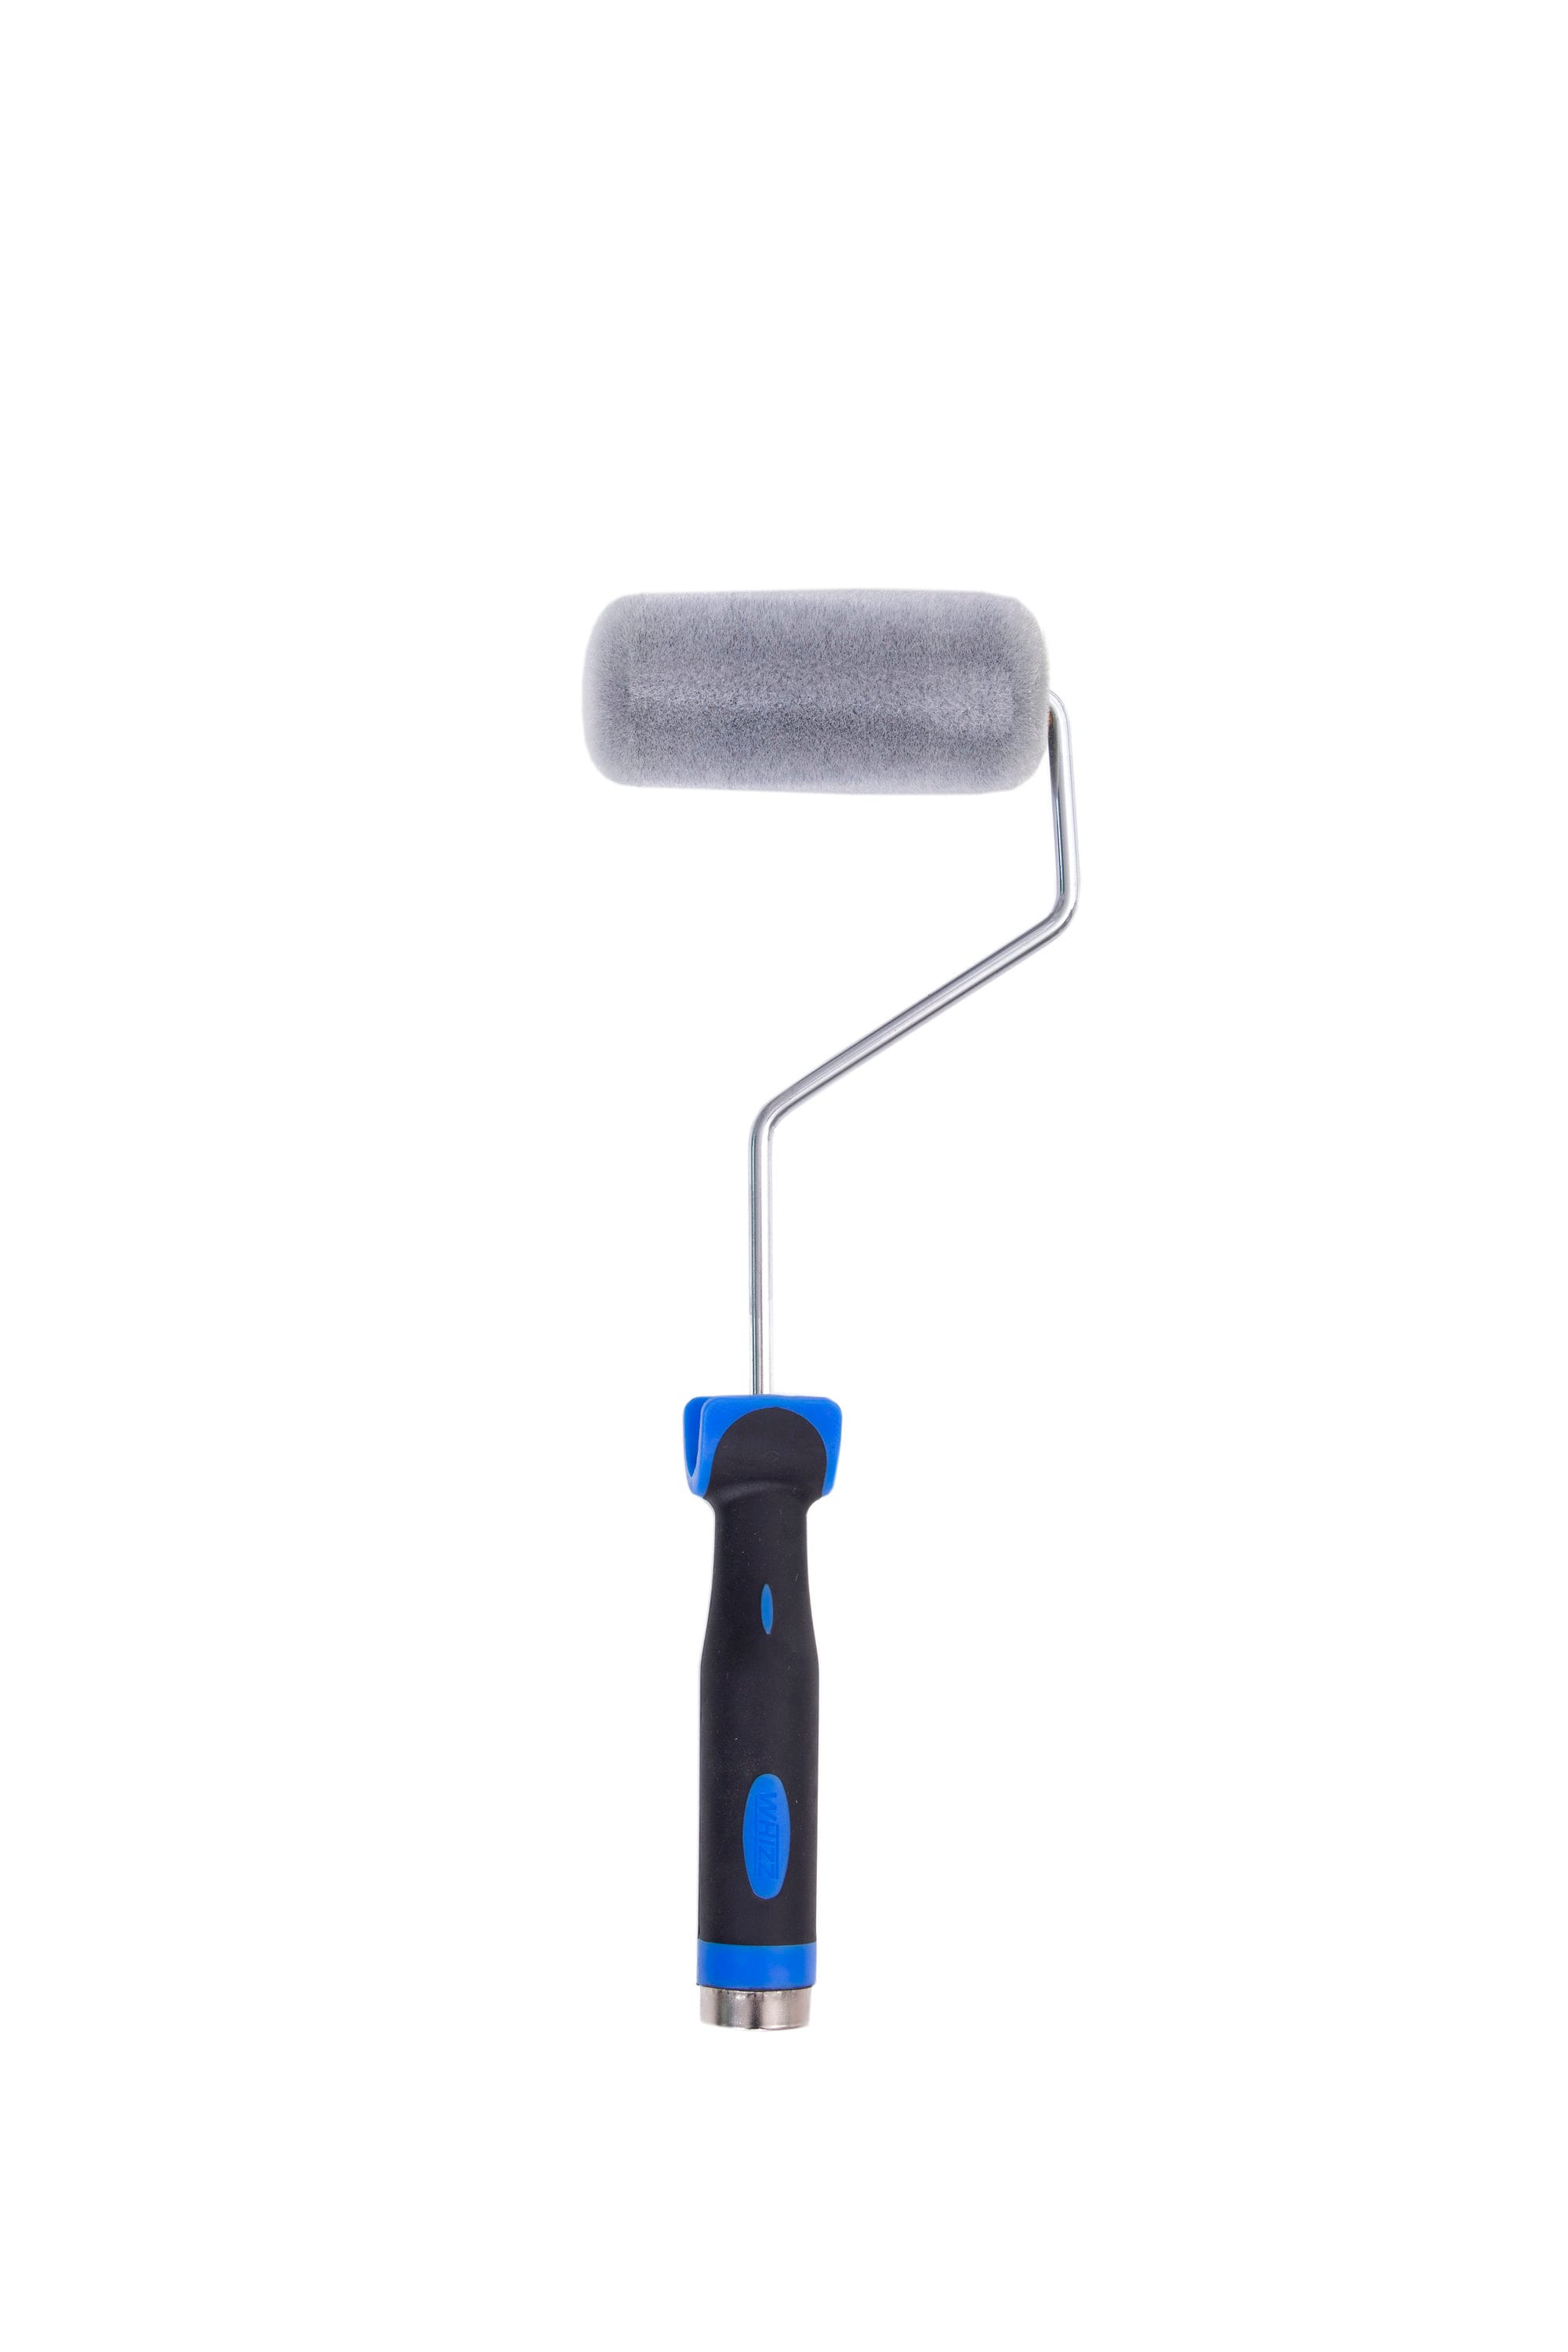 WHIZZ 4-in x 1/4-in Nap Bath and Kitchen Velour Mini Paint Roller